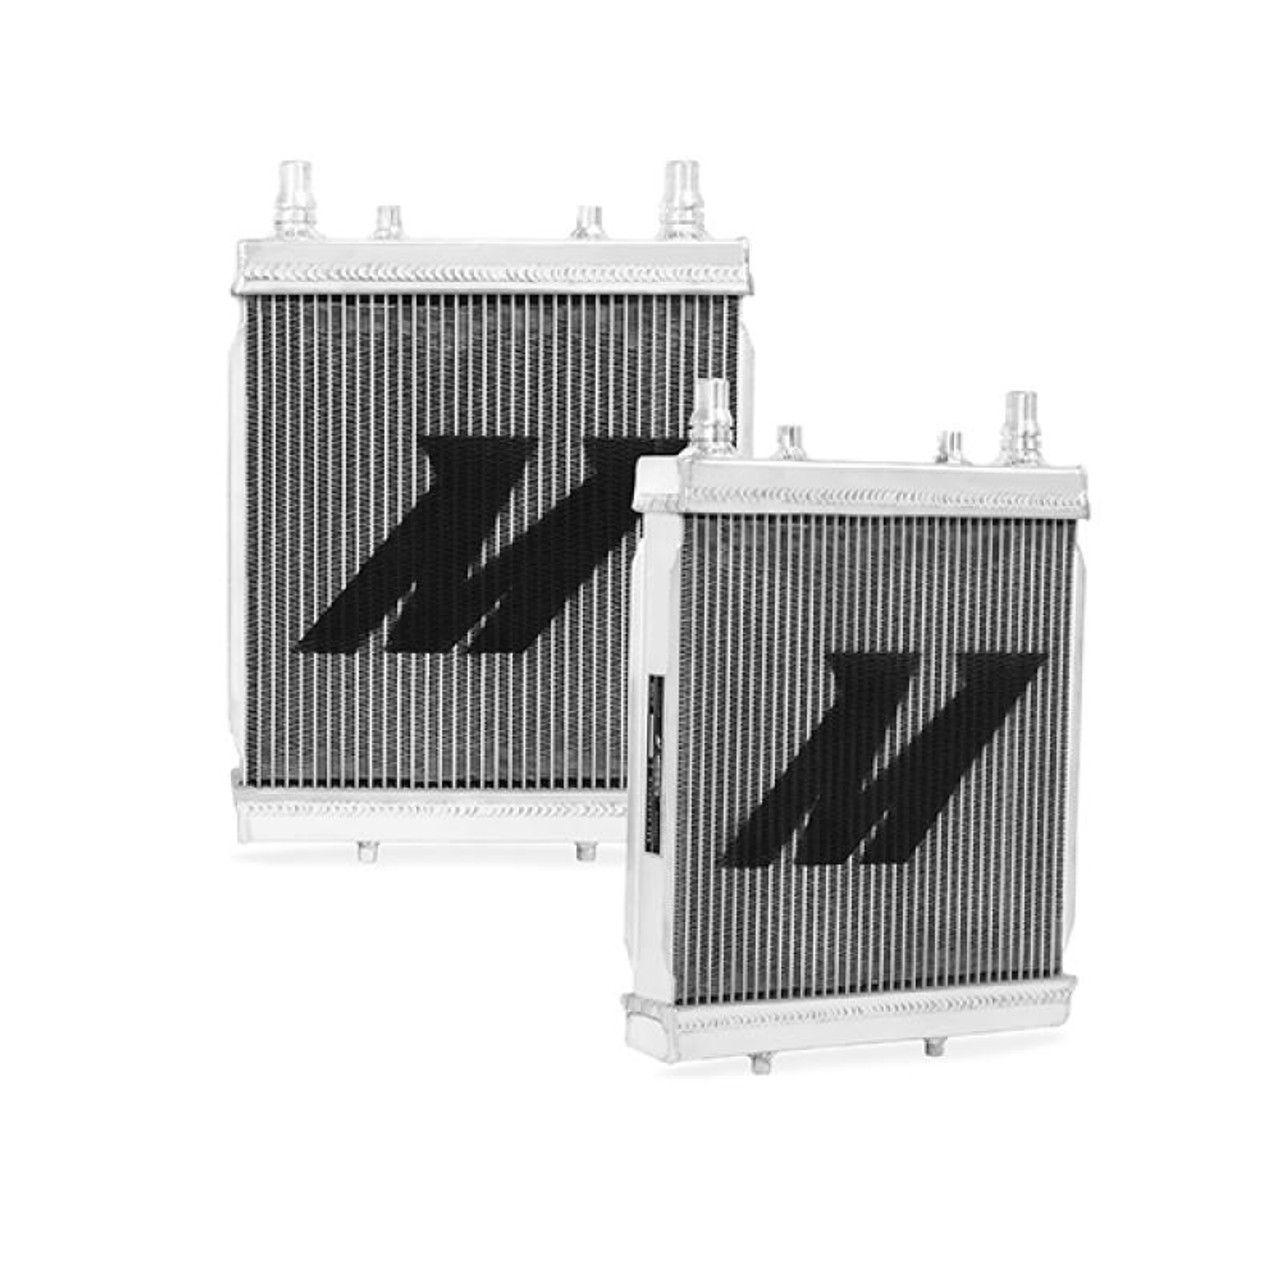 Mishimoto 2016 Chevrolet Camaro SS or HD Cooling Package Performance Aux Aluminum Radiators - MMRAD-CAM8-16S